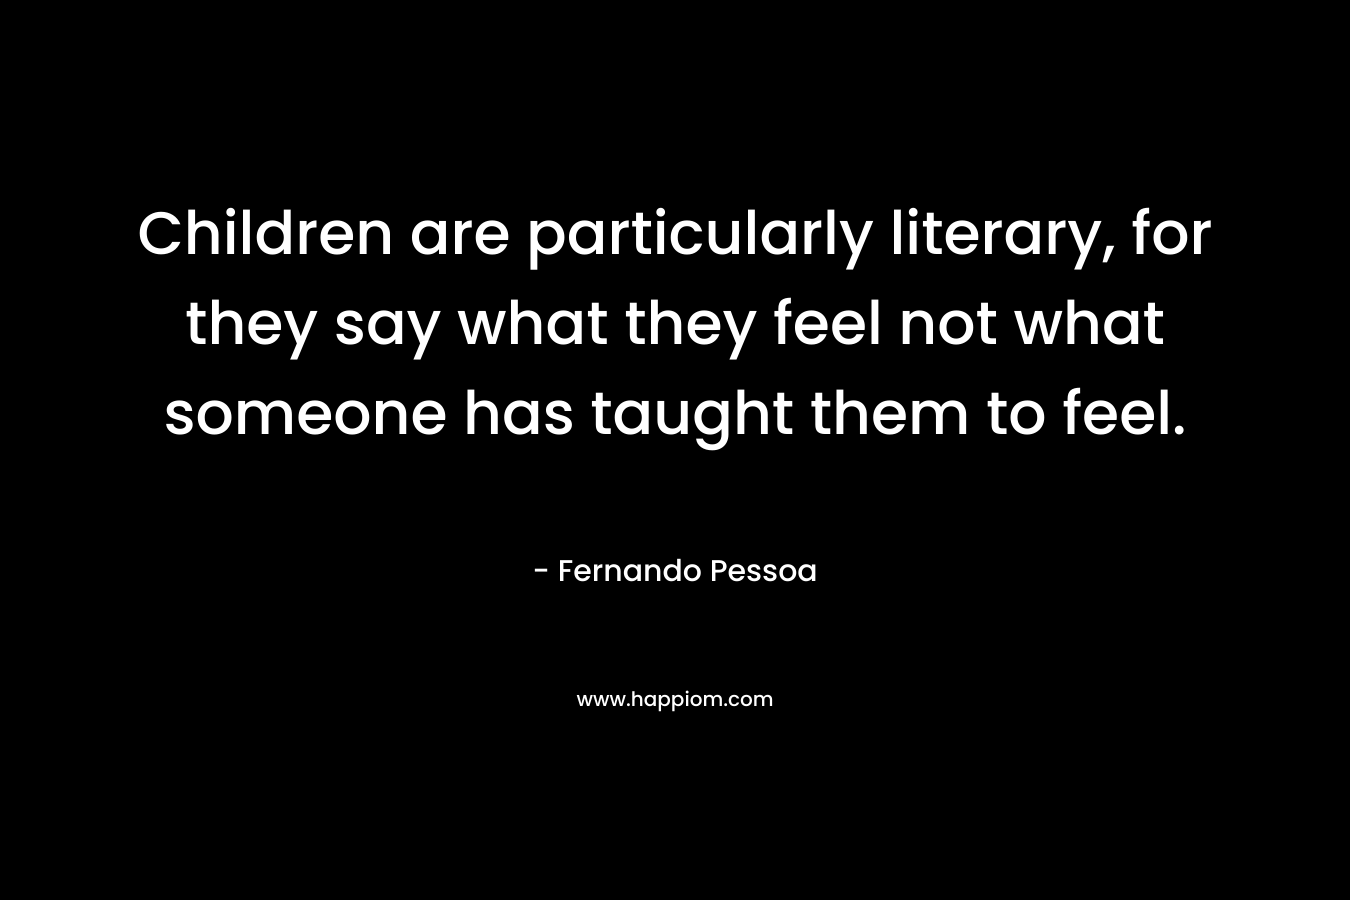 Children are particularly literary, for they say what they feel not what someone has taught them to feel.